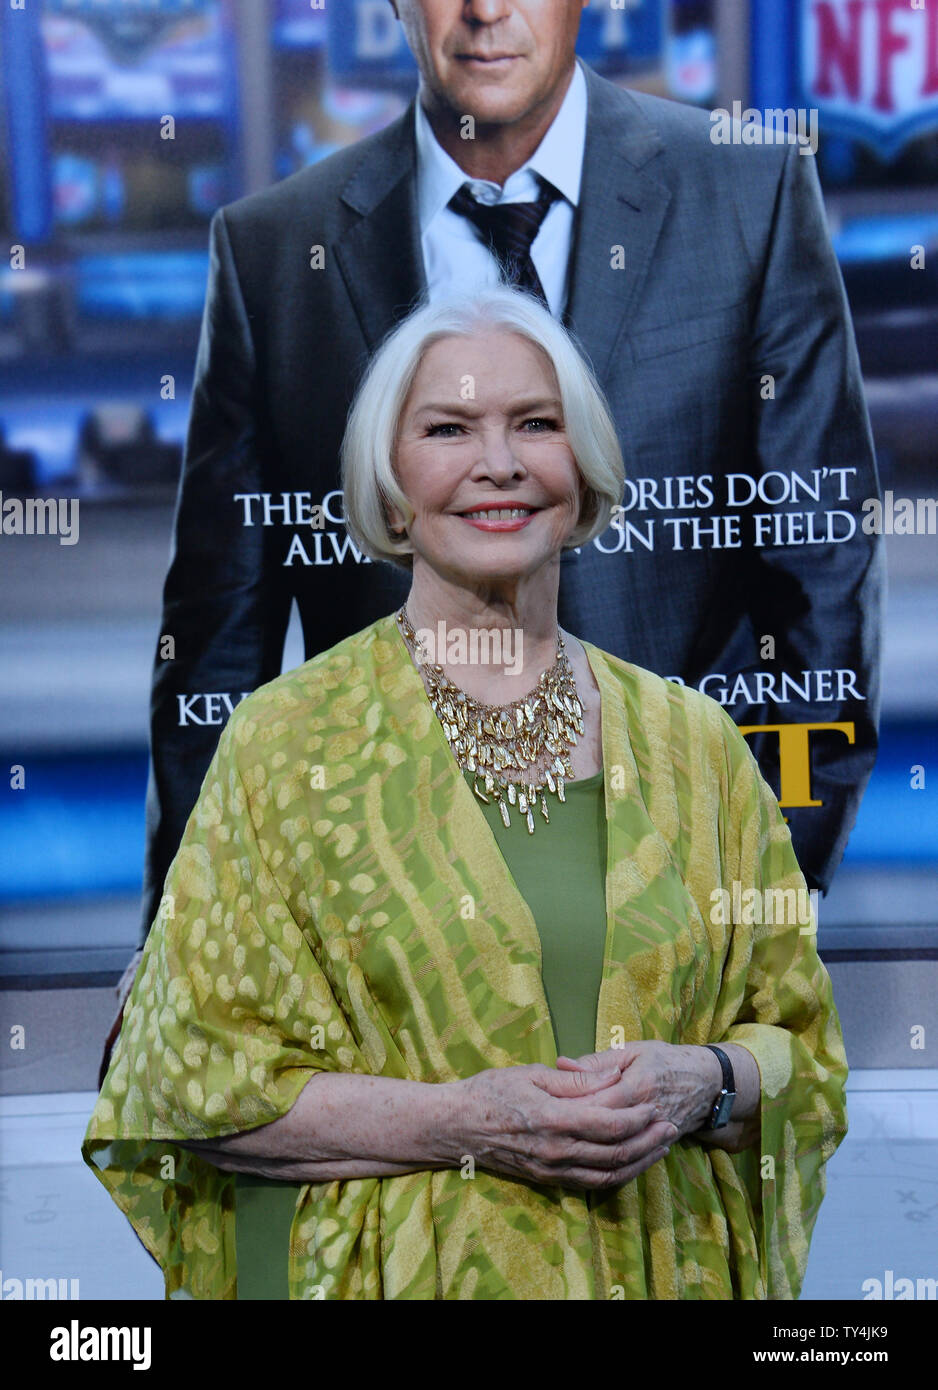 Cast member Ellen Burstyn attends the premiere of the motion picture sports drama 'Draft Day' at the Regency Village Theatre in the Westwood section of Los Angeles on April 7, 2014 Storyline: At the NFL Draft, general manager Sonny Weaver (Costner) has the opportunity to rebuild his team when he trades for the number one pick. He must decide what he's willing to sacrifice on a life-changing day for a few hundred young men with NFL dreams.  UPI/Jim Ruymen Stock Photo